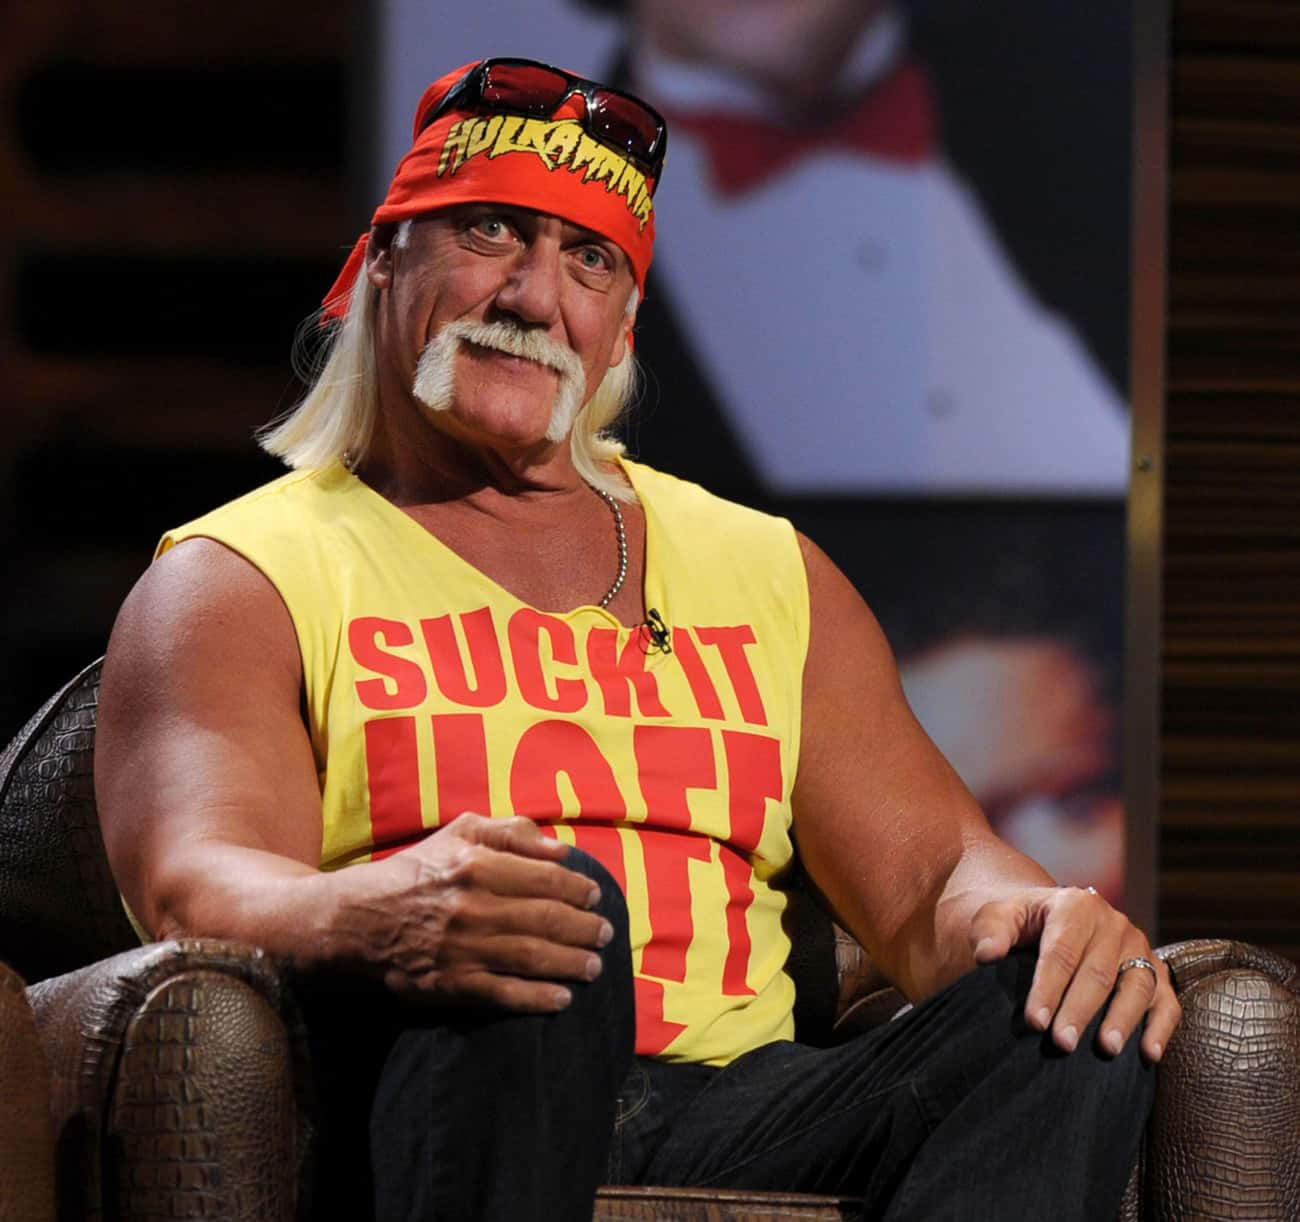 When Hulk Hogan Retweeted an Inappropriate Tweet About His Own Daughter